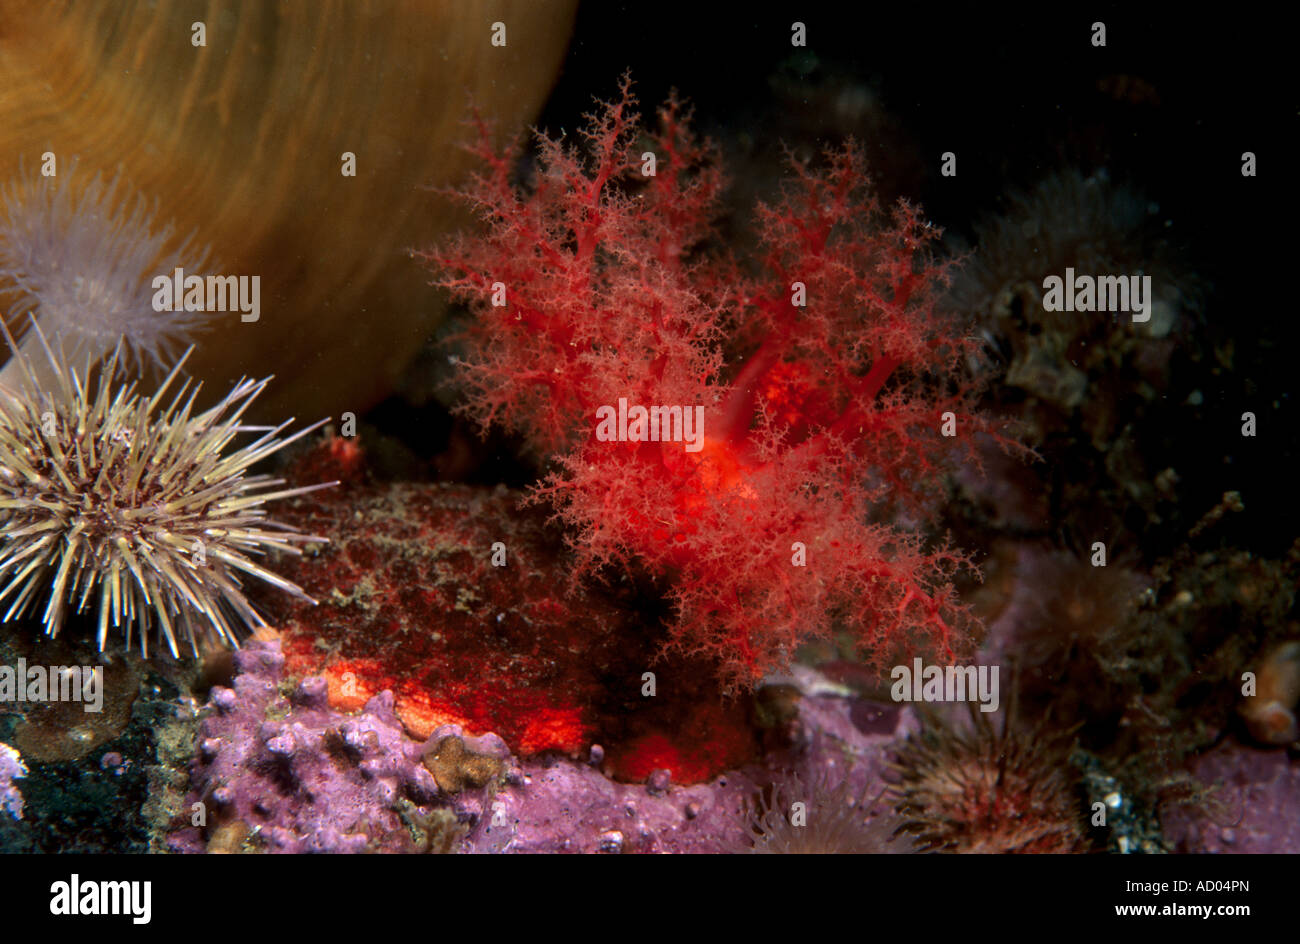 A specimen of carmine red marine benthic holothurian Psolus fabricii sitting on a stone and spreading tentacles Pacific Stock Photo